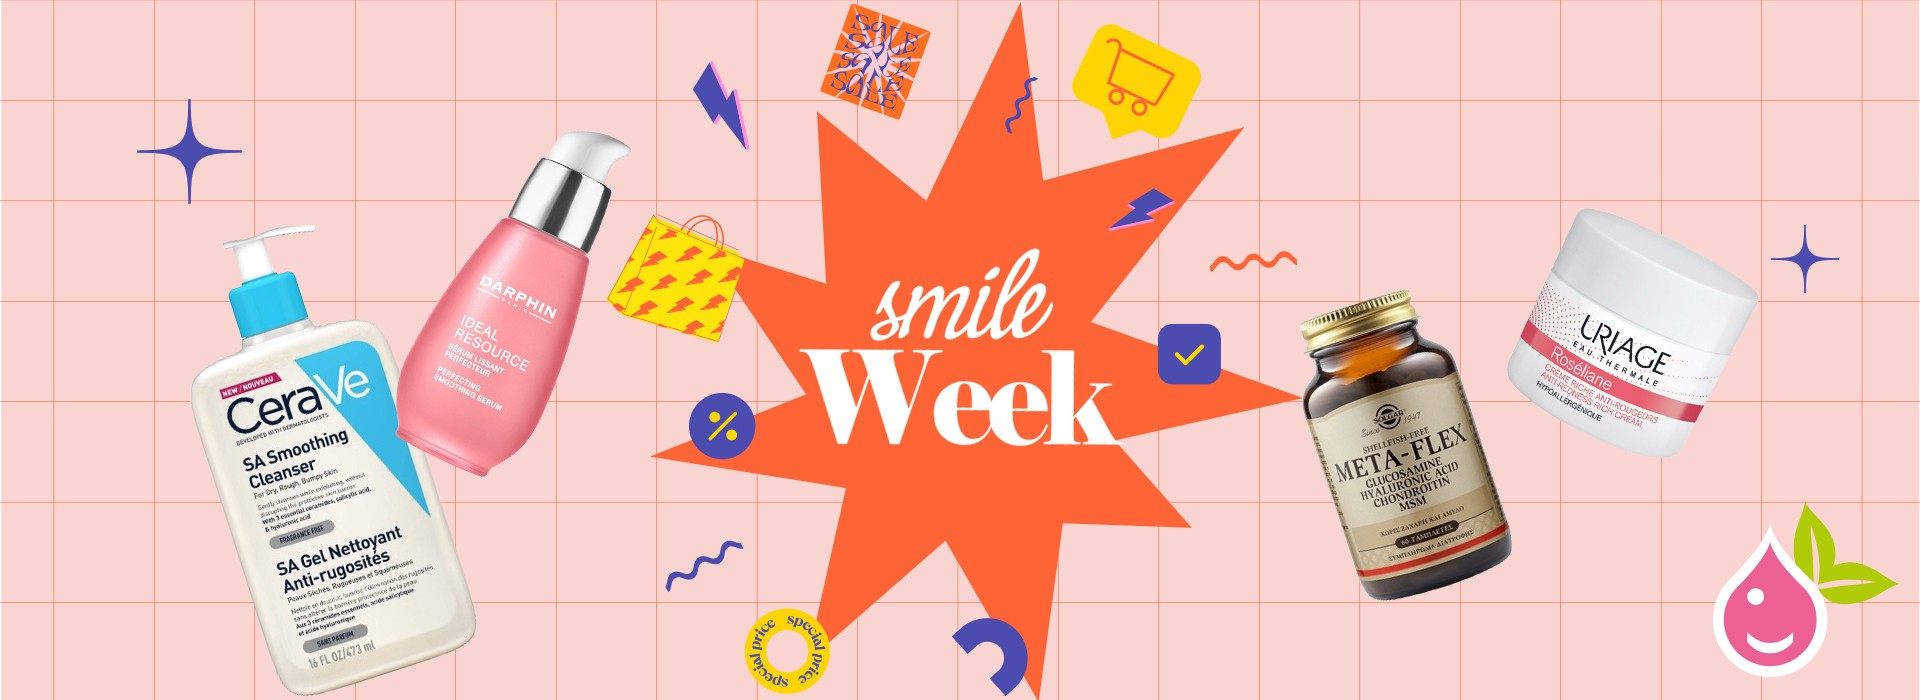 Don't miss this Smile Week!